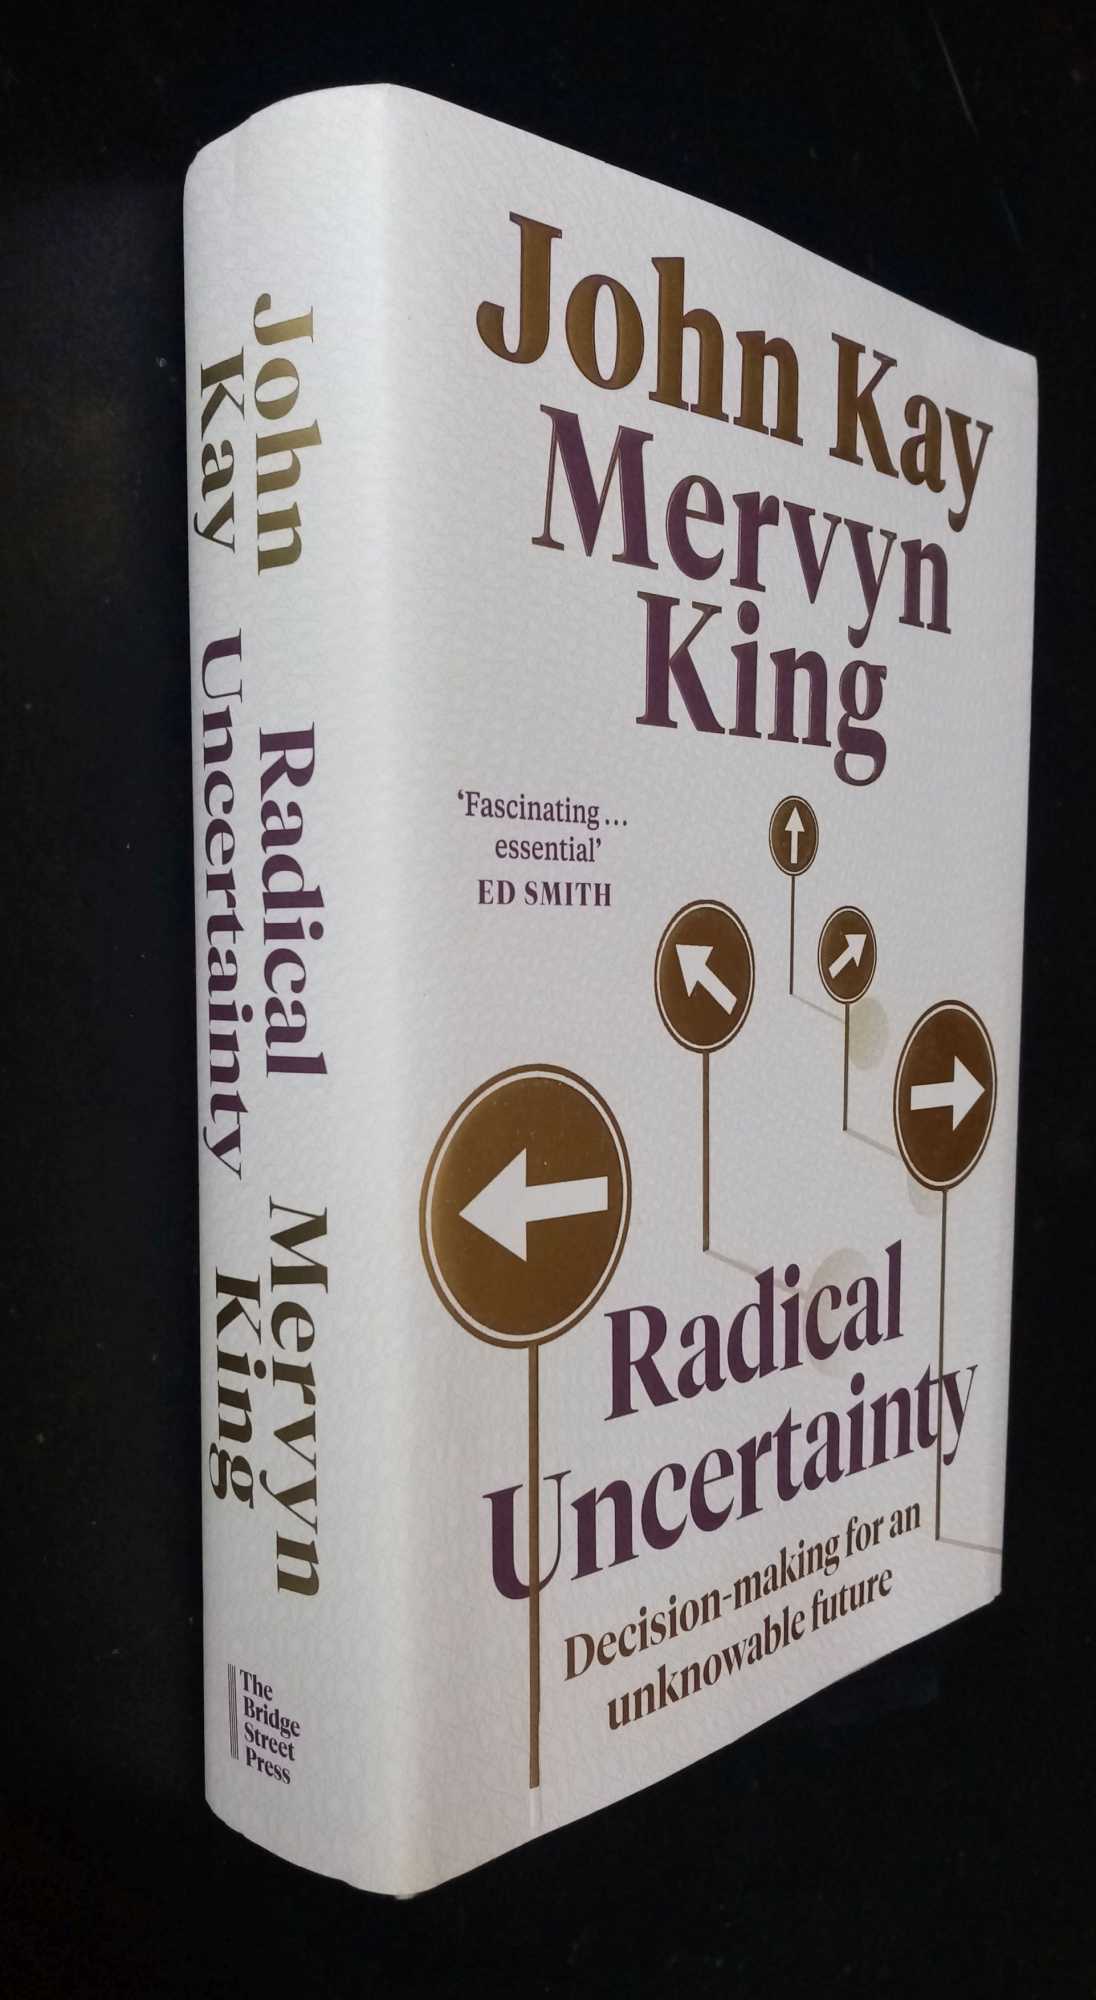 Mervyn King, John Kay - Radical Uncertainty: Decision-making for an unknowable future